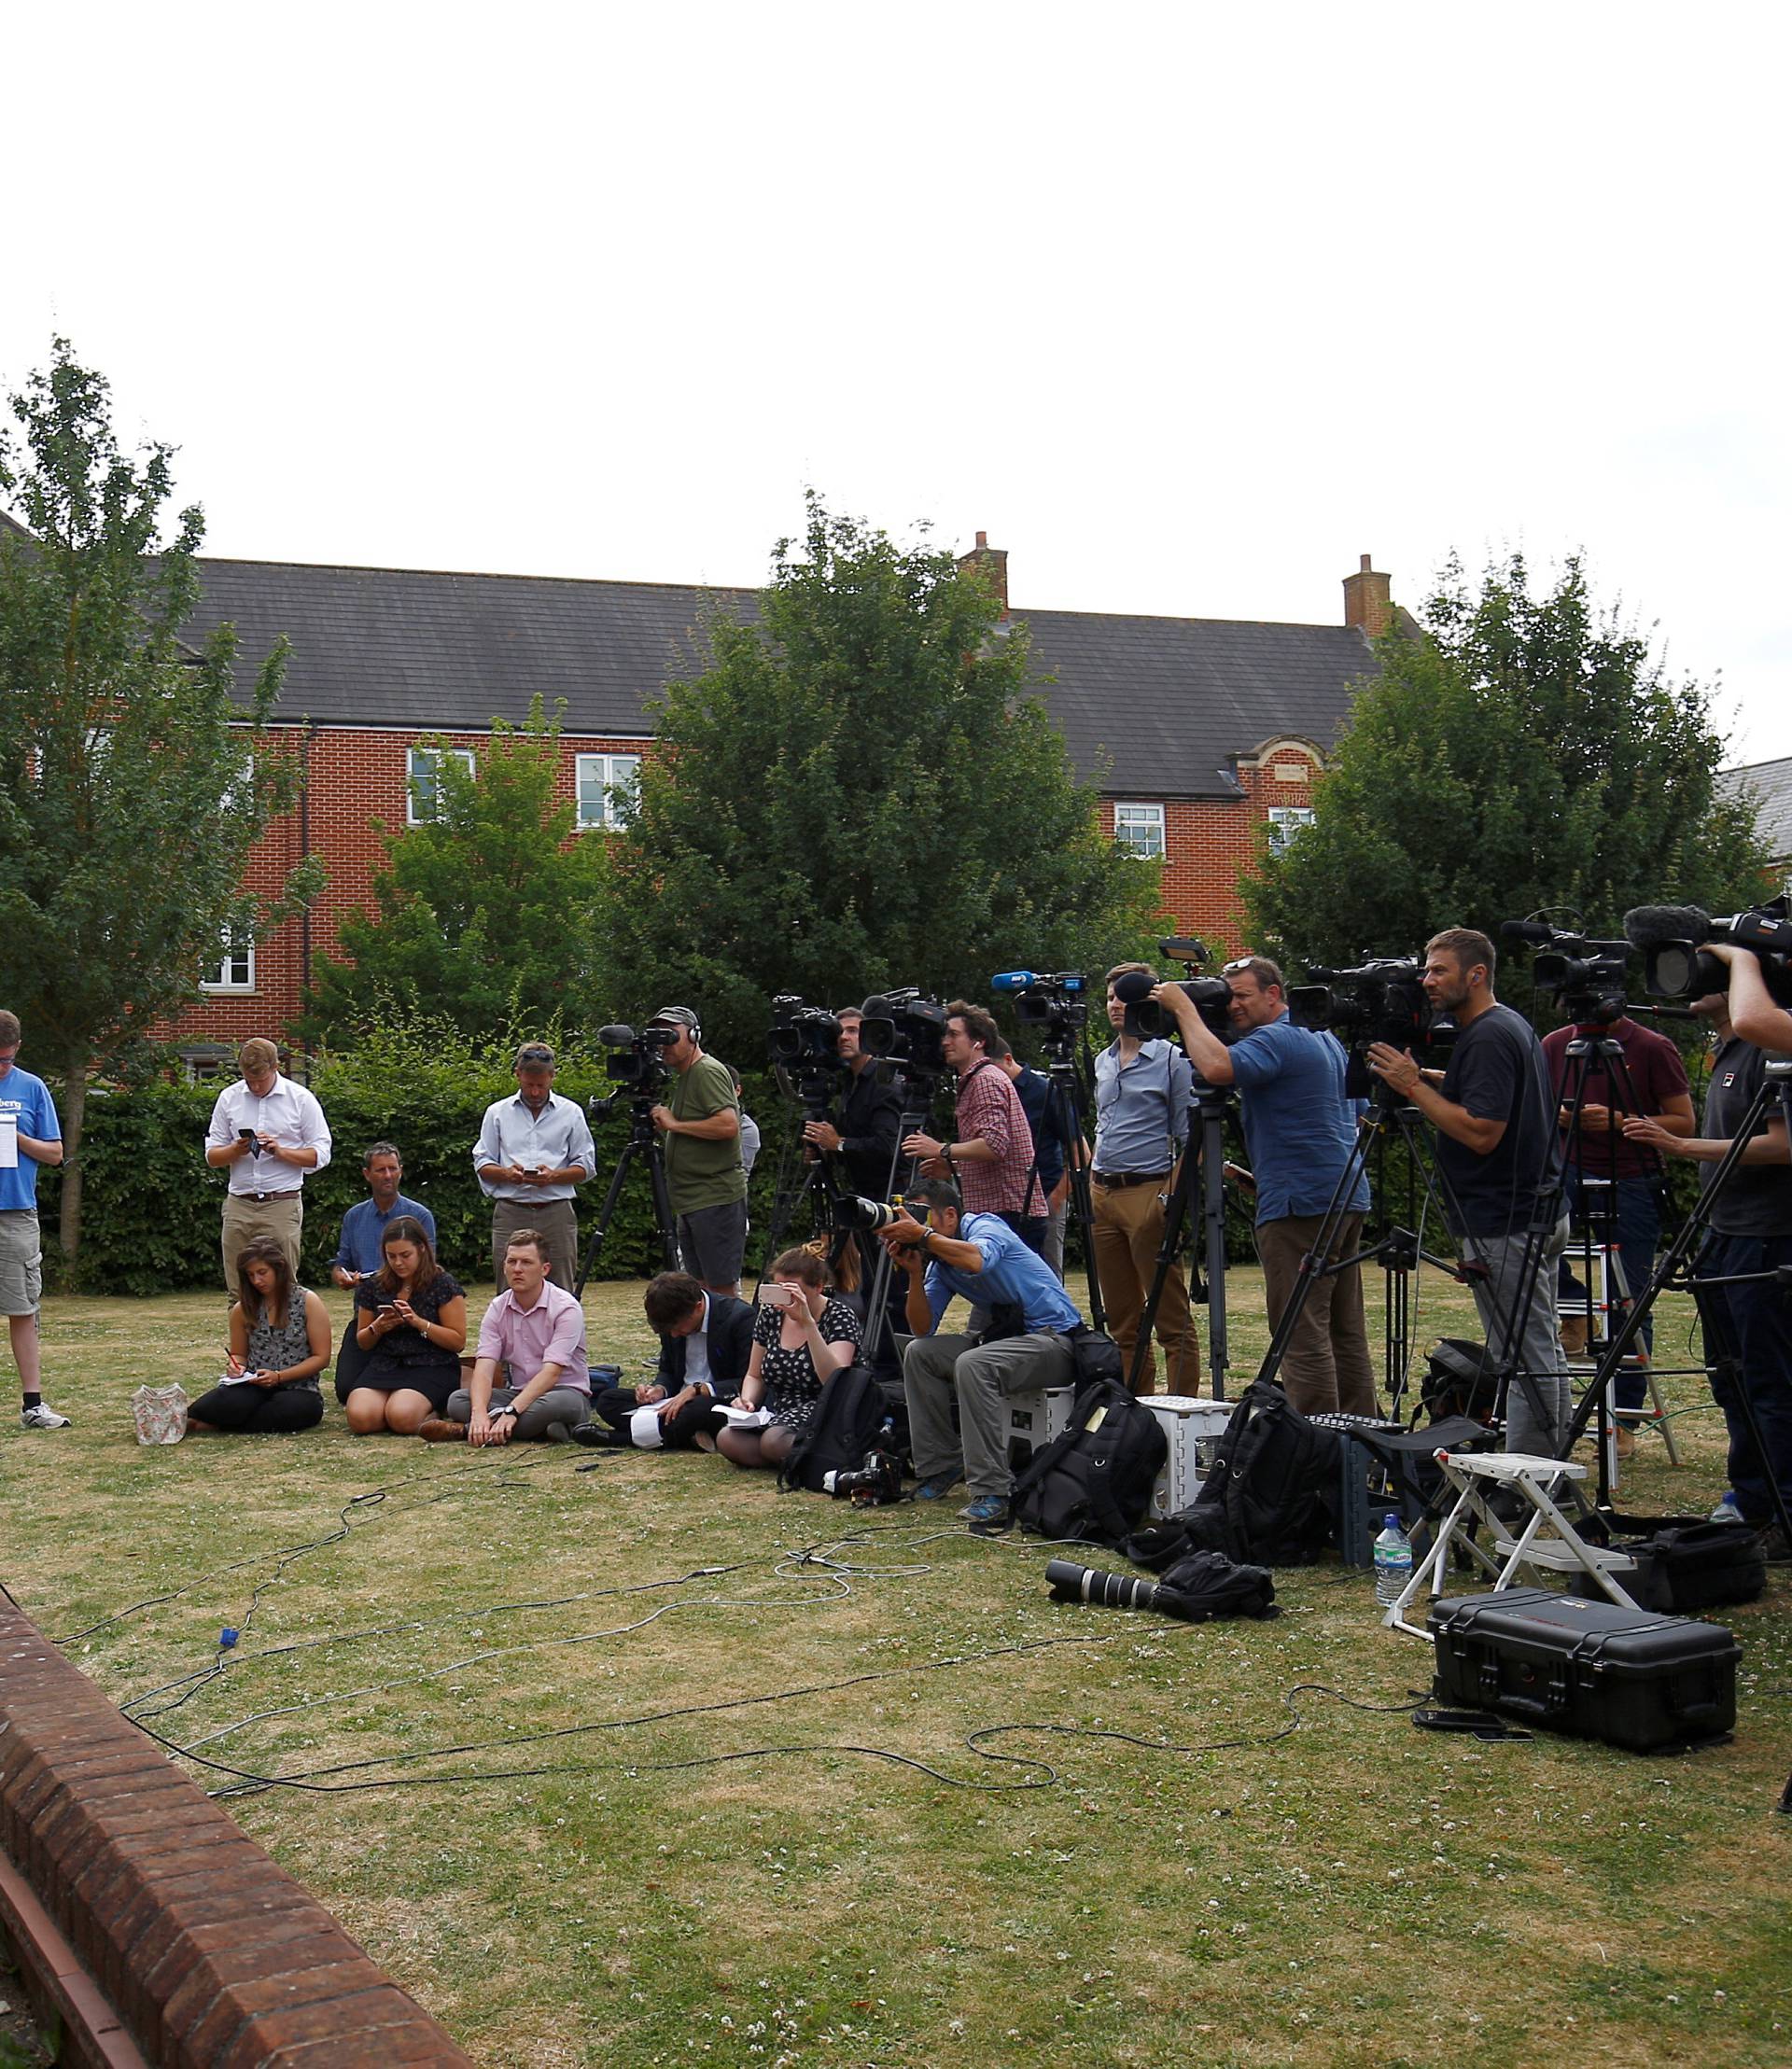 Deputy Chief Constable of Wiltshire Police Paul Mills addresses the media outside the Bowman Centre community hall, after two people were hospitalised and police declared a 'major incident', in Amesbury